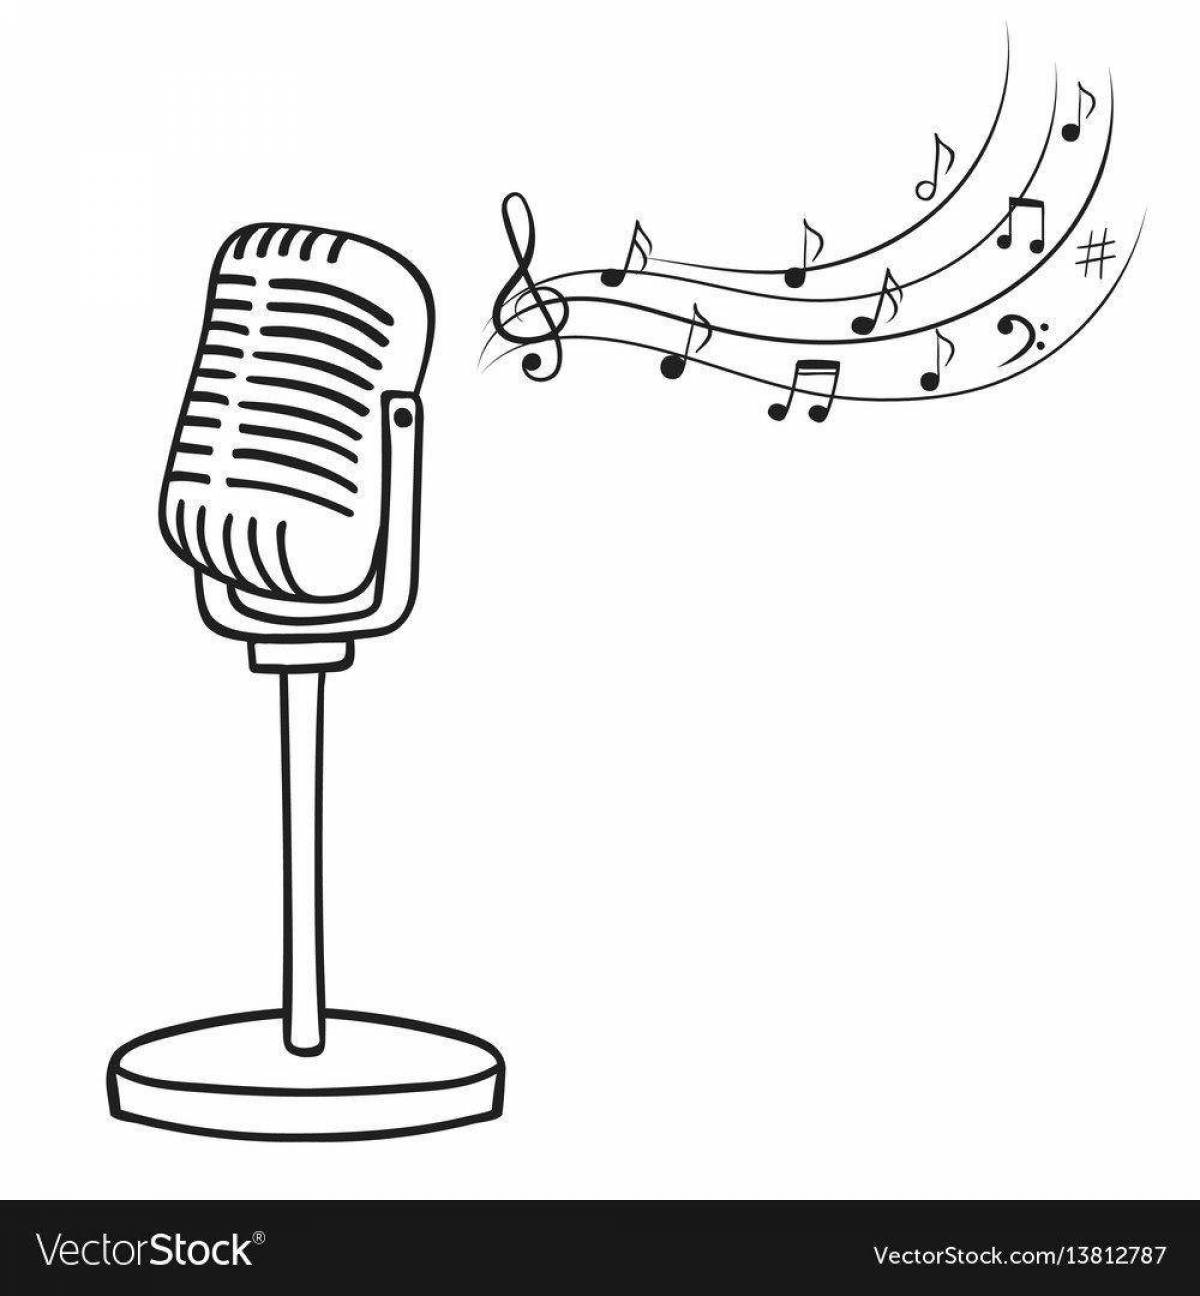 Adorable microphone coloring book for kids